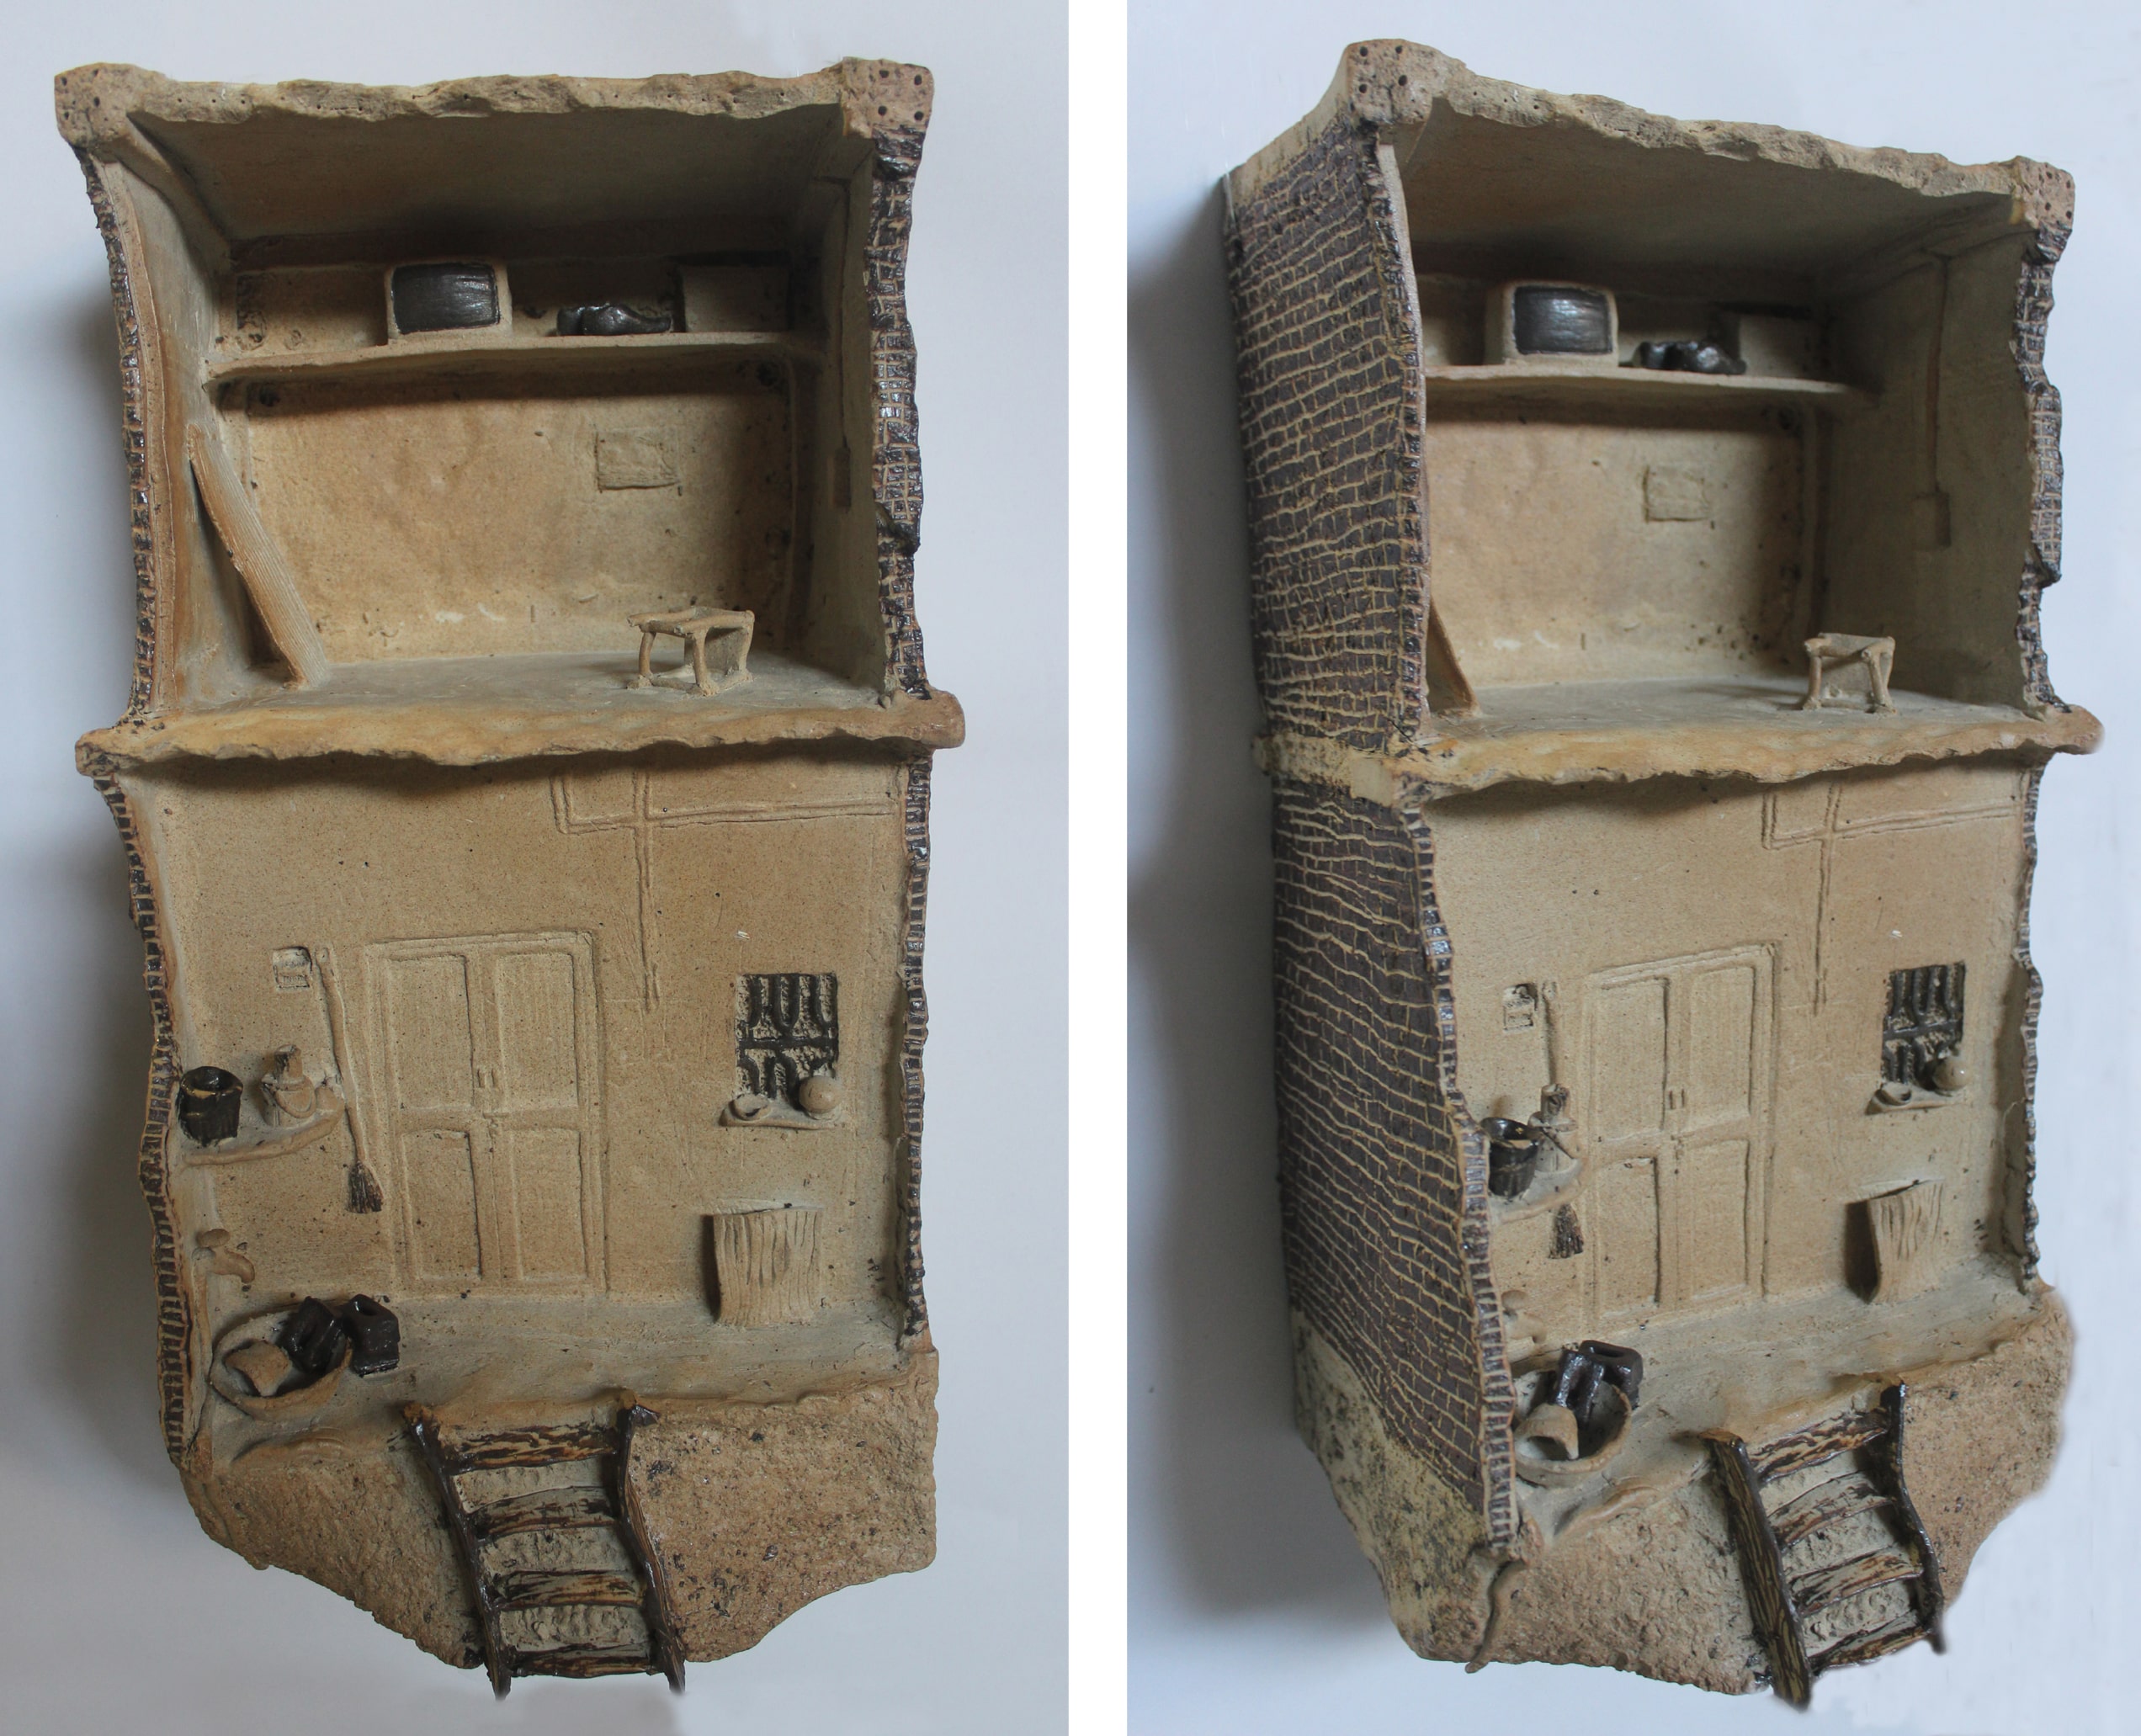 An open house in the city_stoneware_8x9x20 Inches_2017